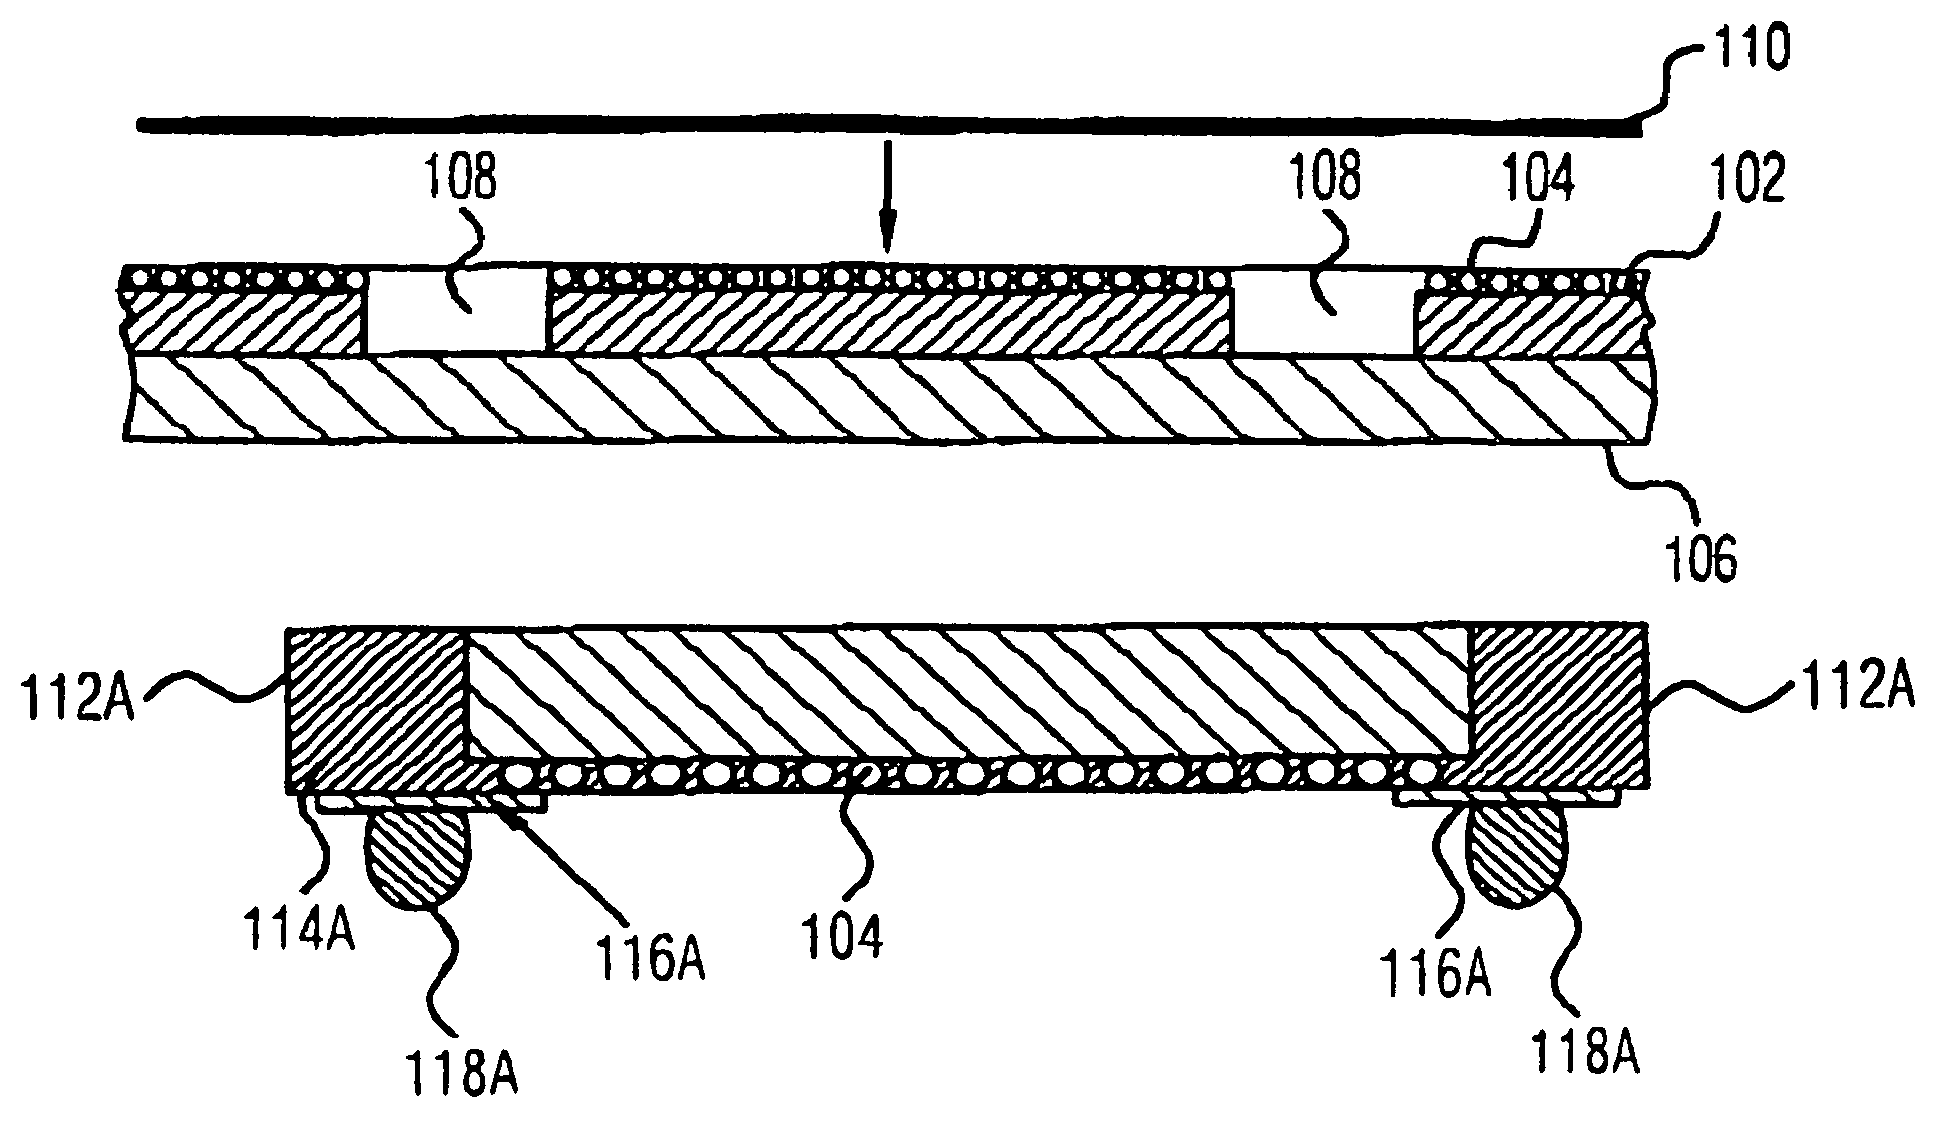 Method for producing encapsulated chips